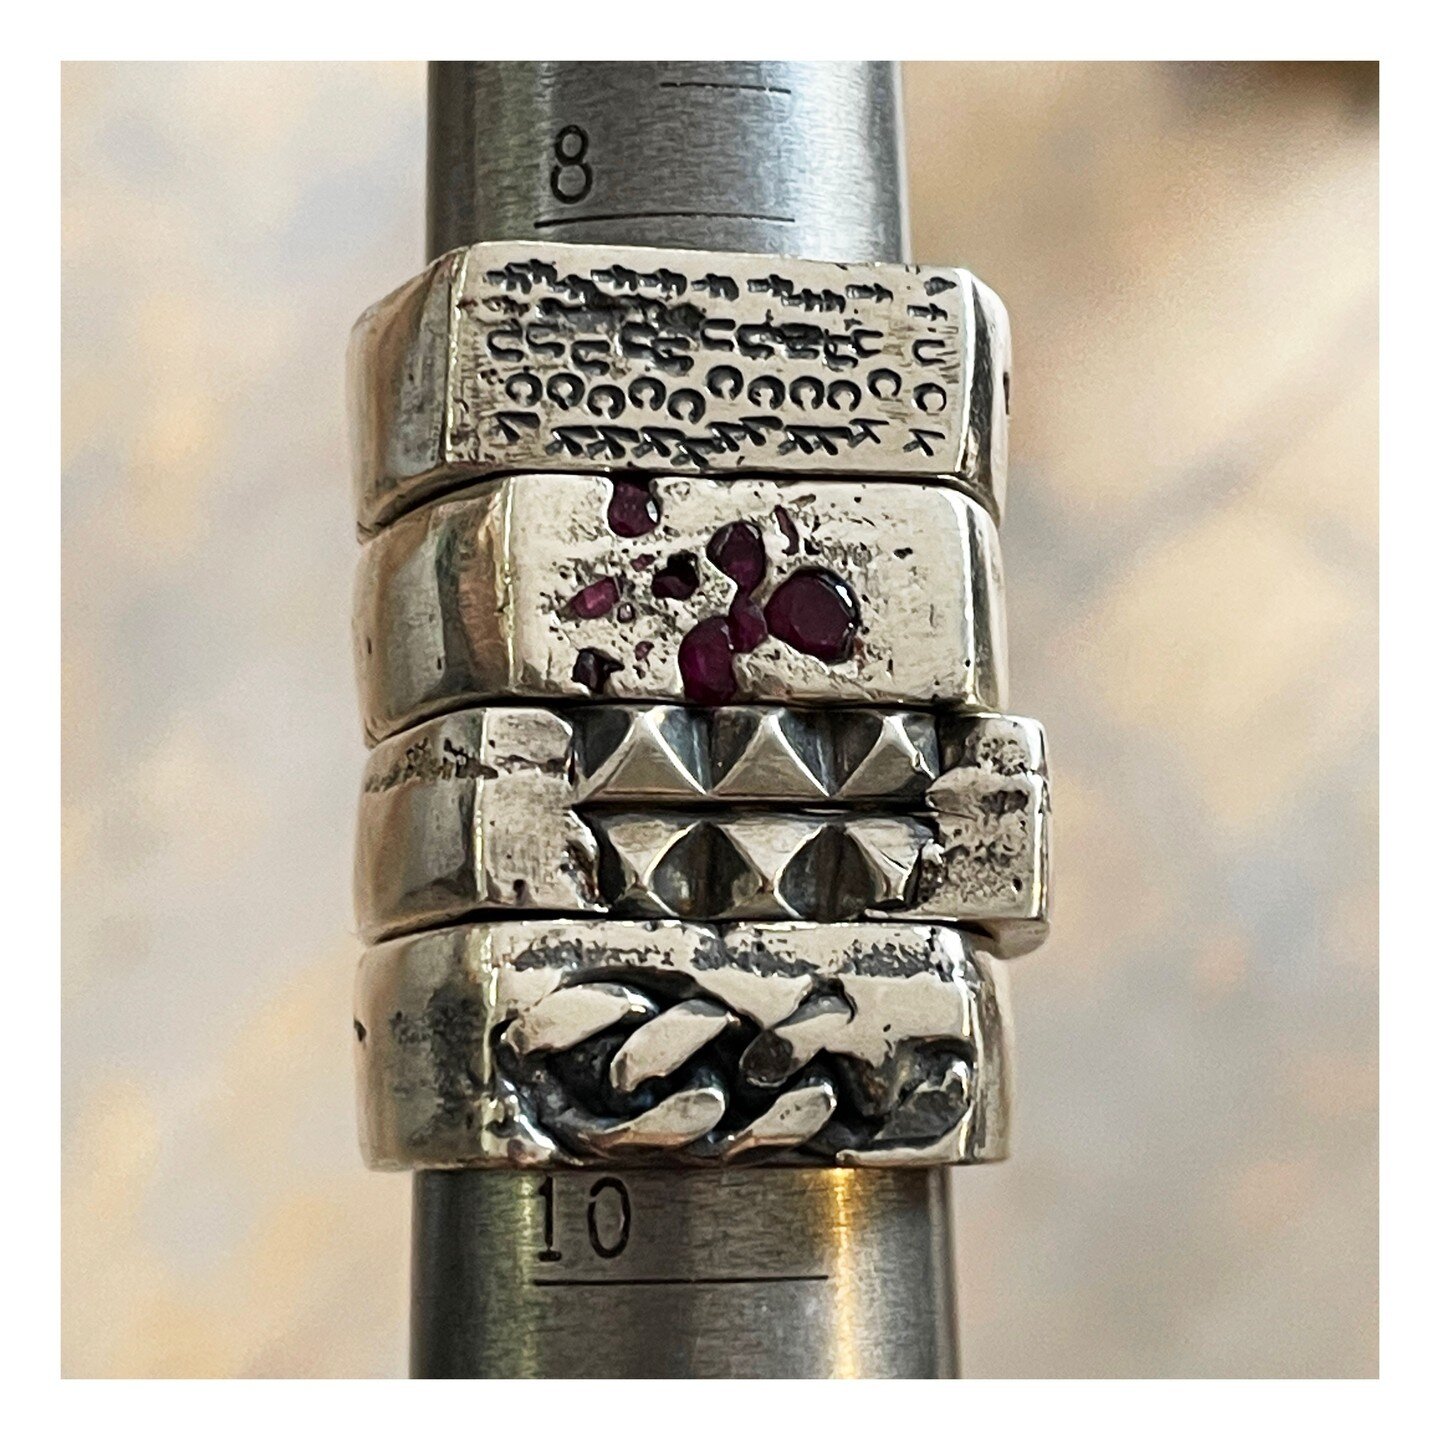 Holiday ordering is closed outside of local Berlin pickup, but our work is available through a number of retail partnerships in the US, including these rings available in Joshua Tree @rockandrapture.

#metalatelier #rocknroll #rocknrolljewelry#heavym